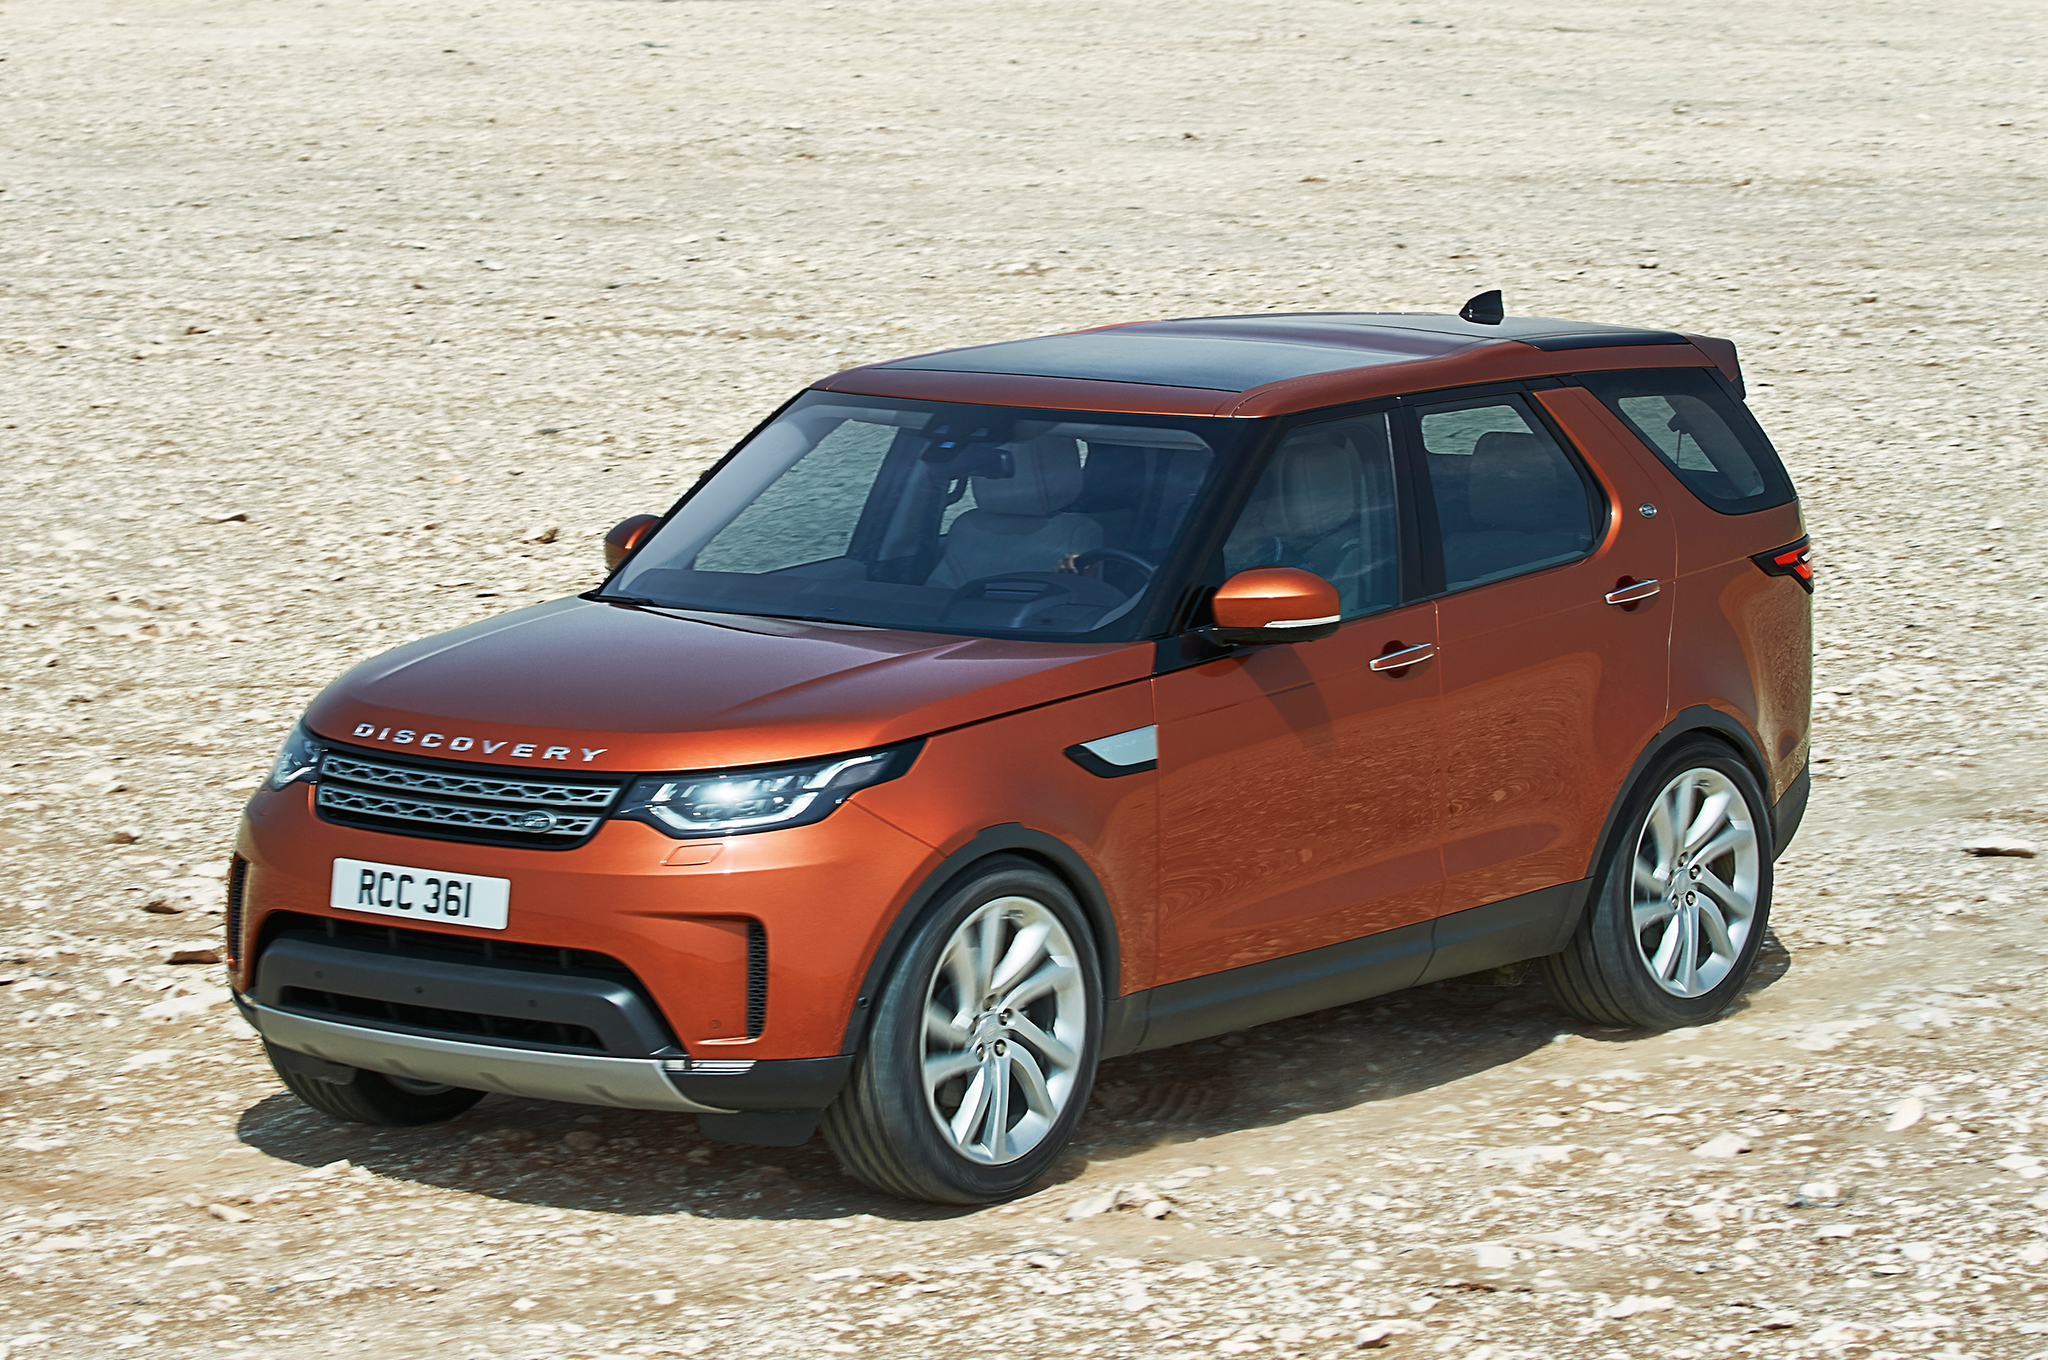 Land Rover Discovery HD wallpapers, Desktop wallpaper - most viewed